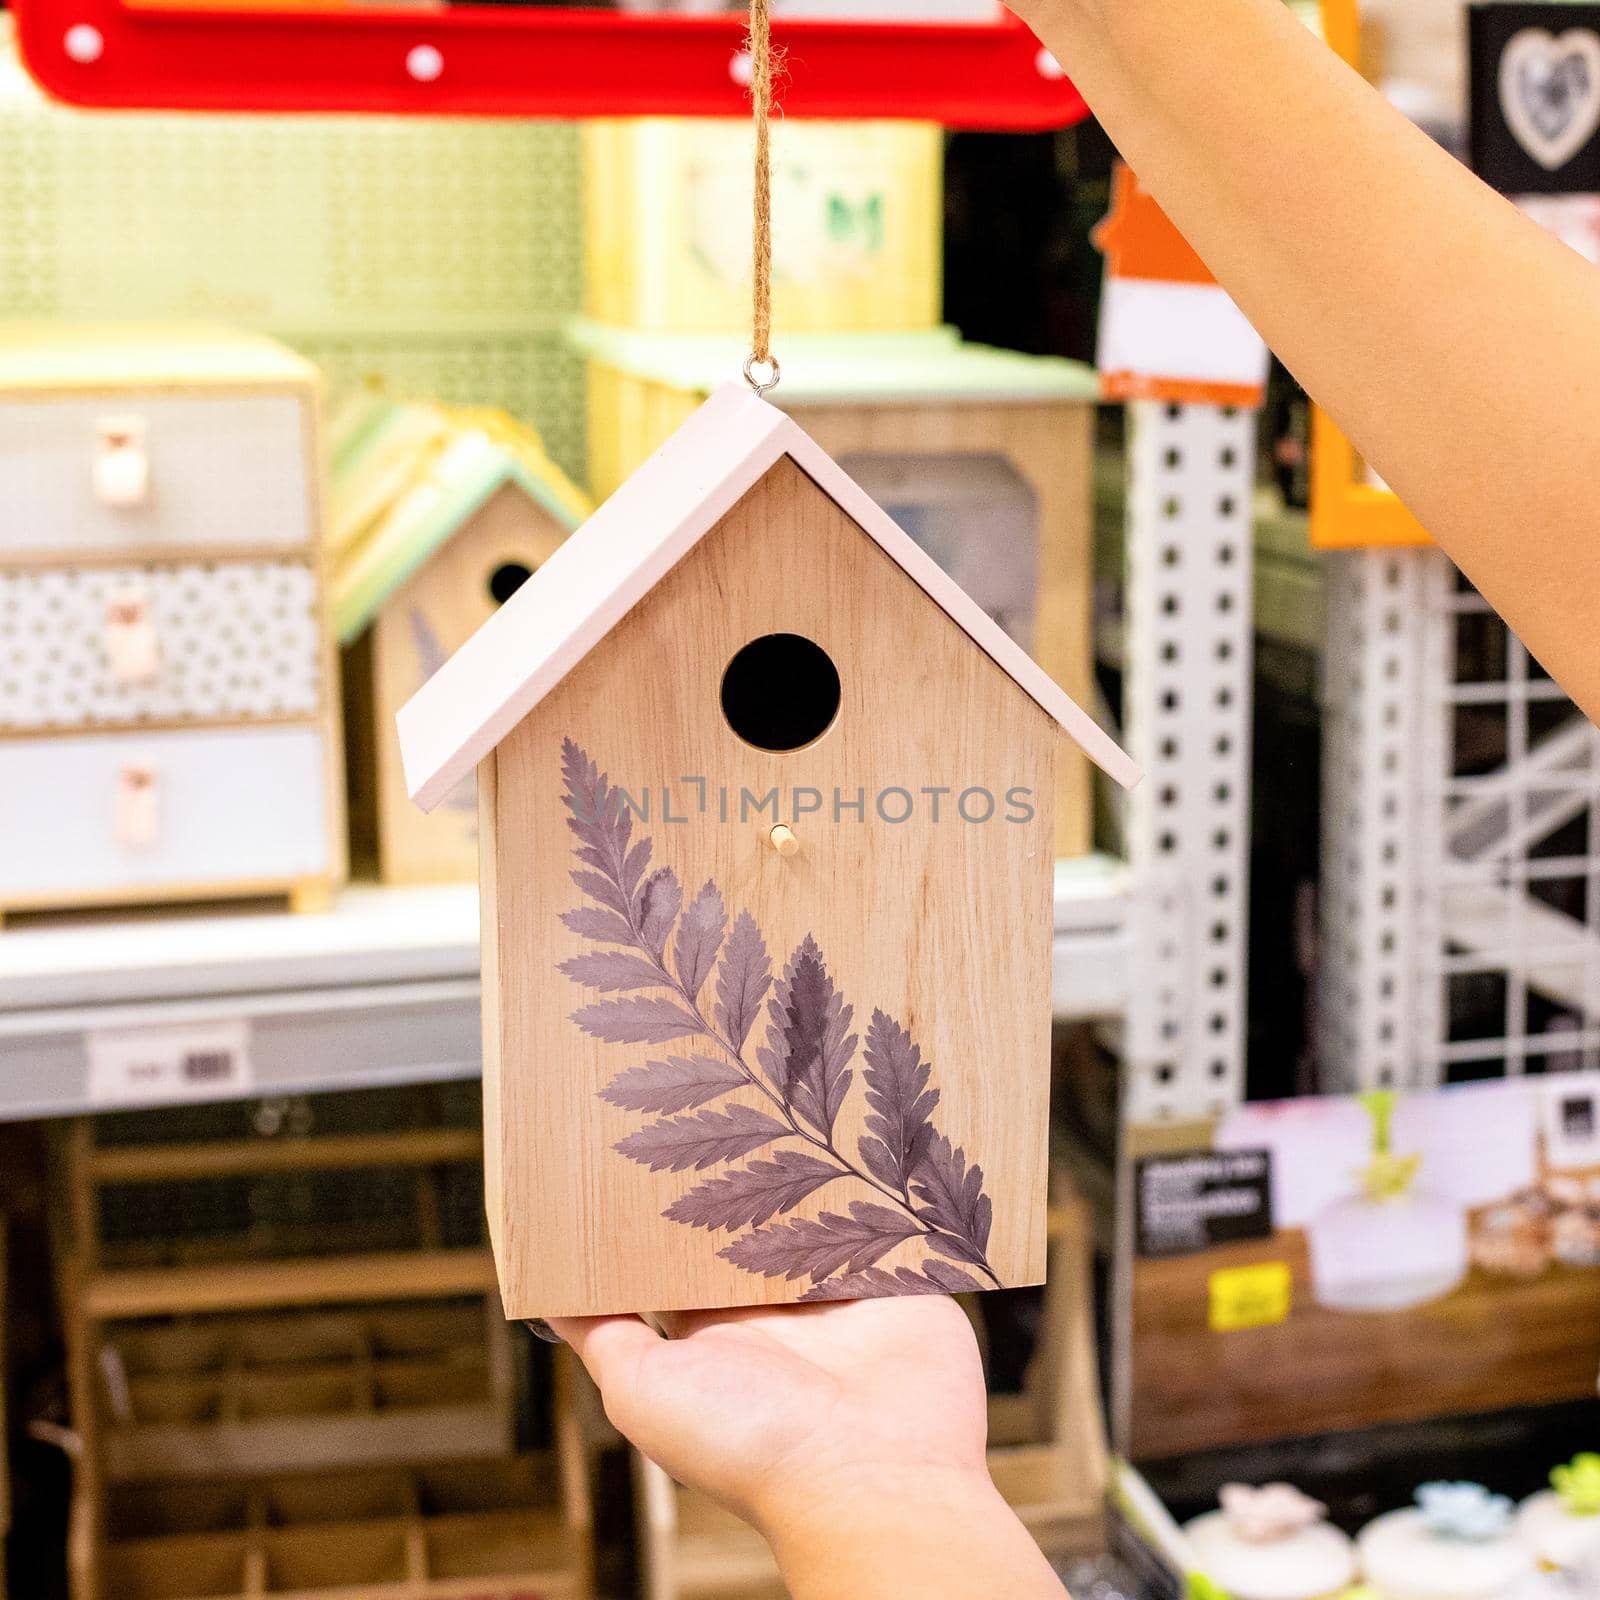 Wooden birdhouse at the store by ferhad